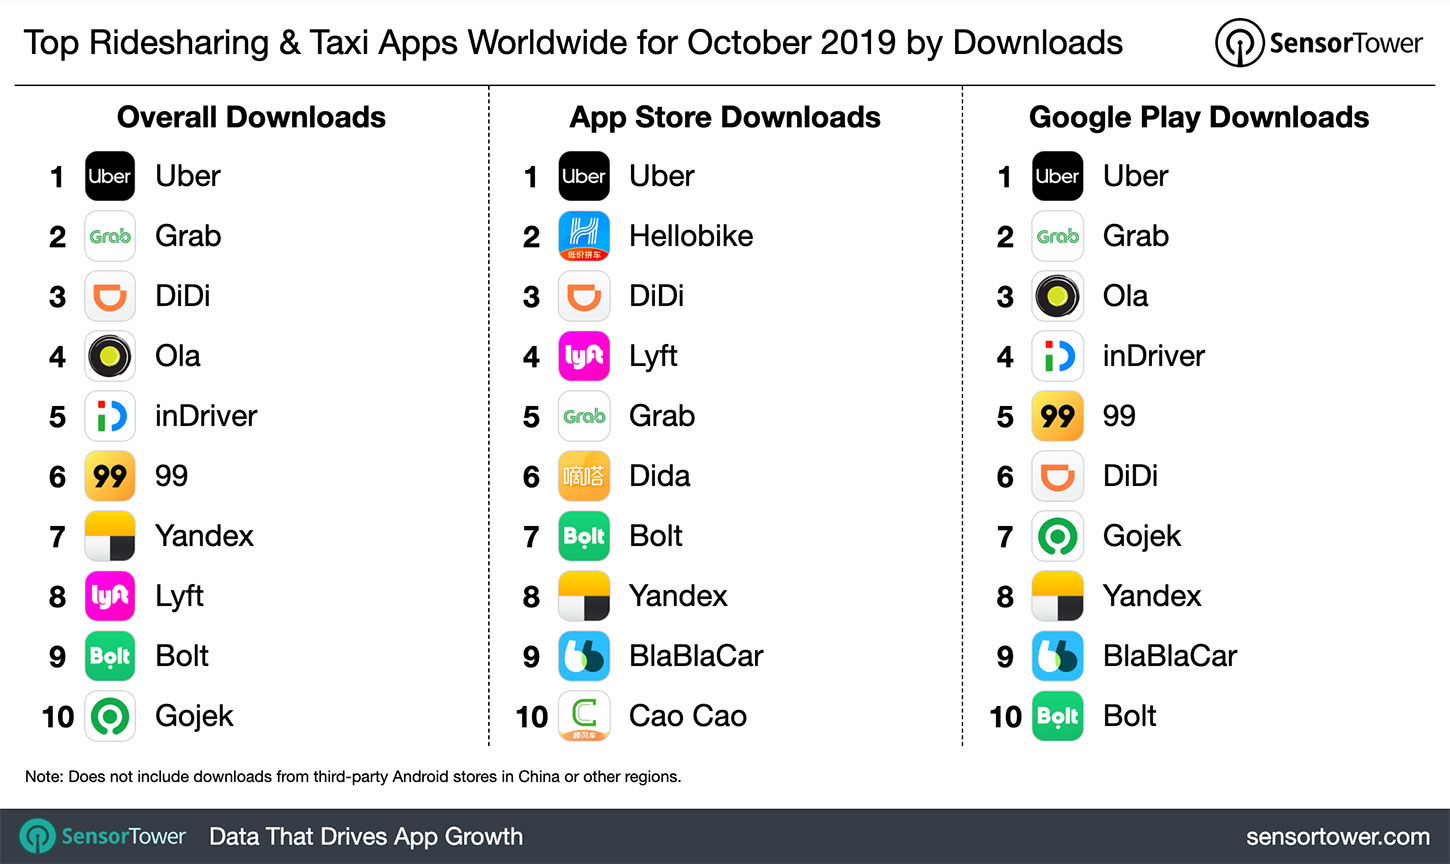 Top Ridesharing & Taxi Apps Worldwide for October 2019 by Downloads